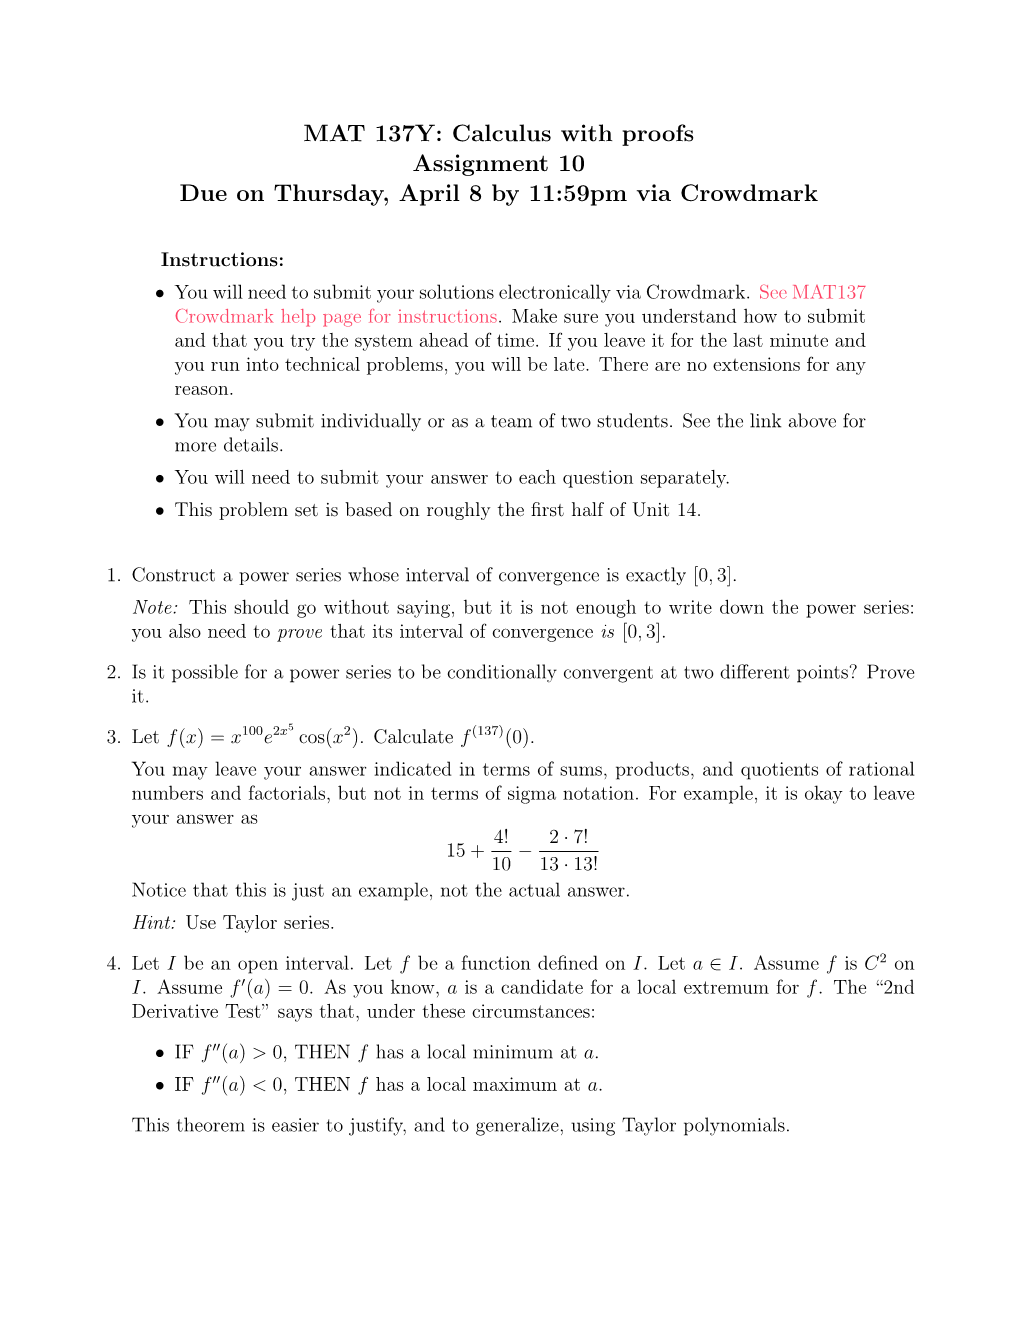 Calculus with Proofs Assignment 10 Due on Thursday, April 8 by 11:59Pm Via Crowdmark